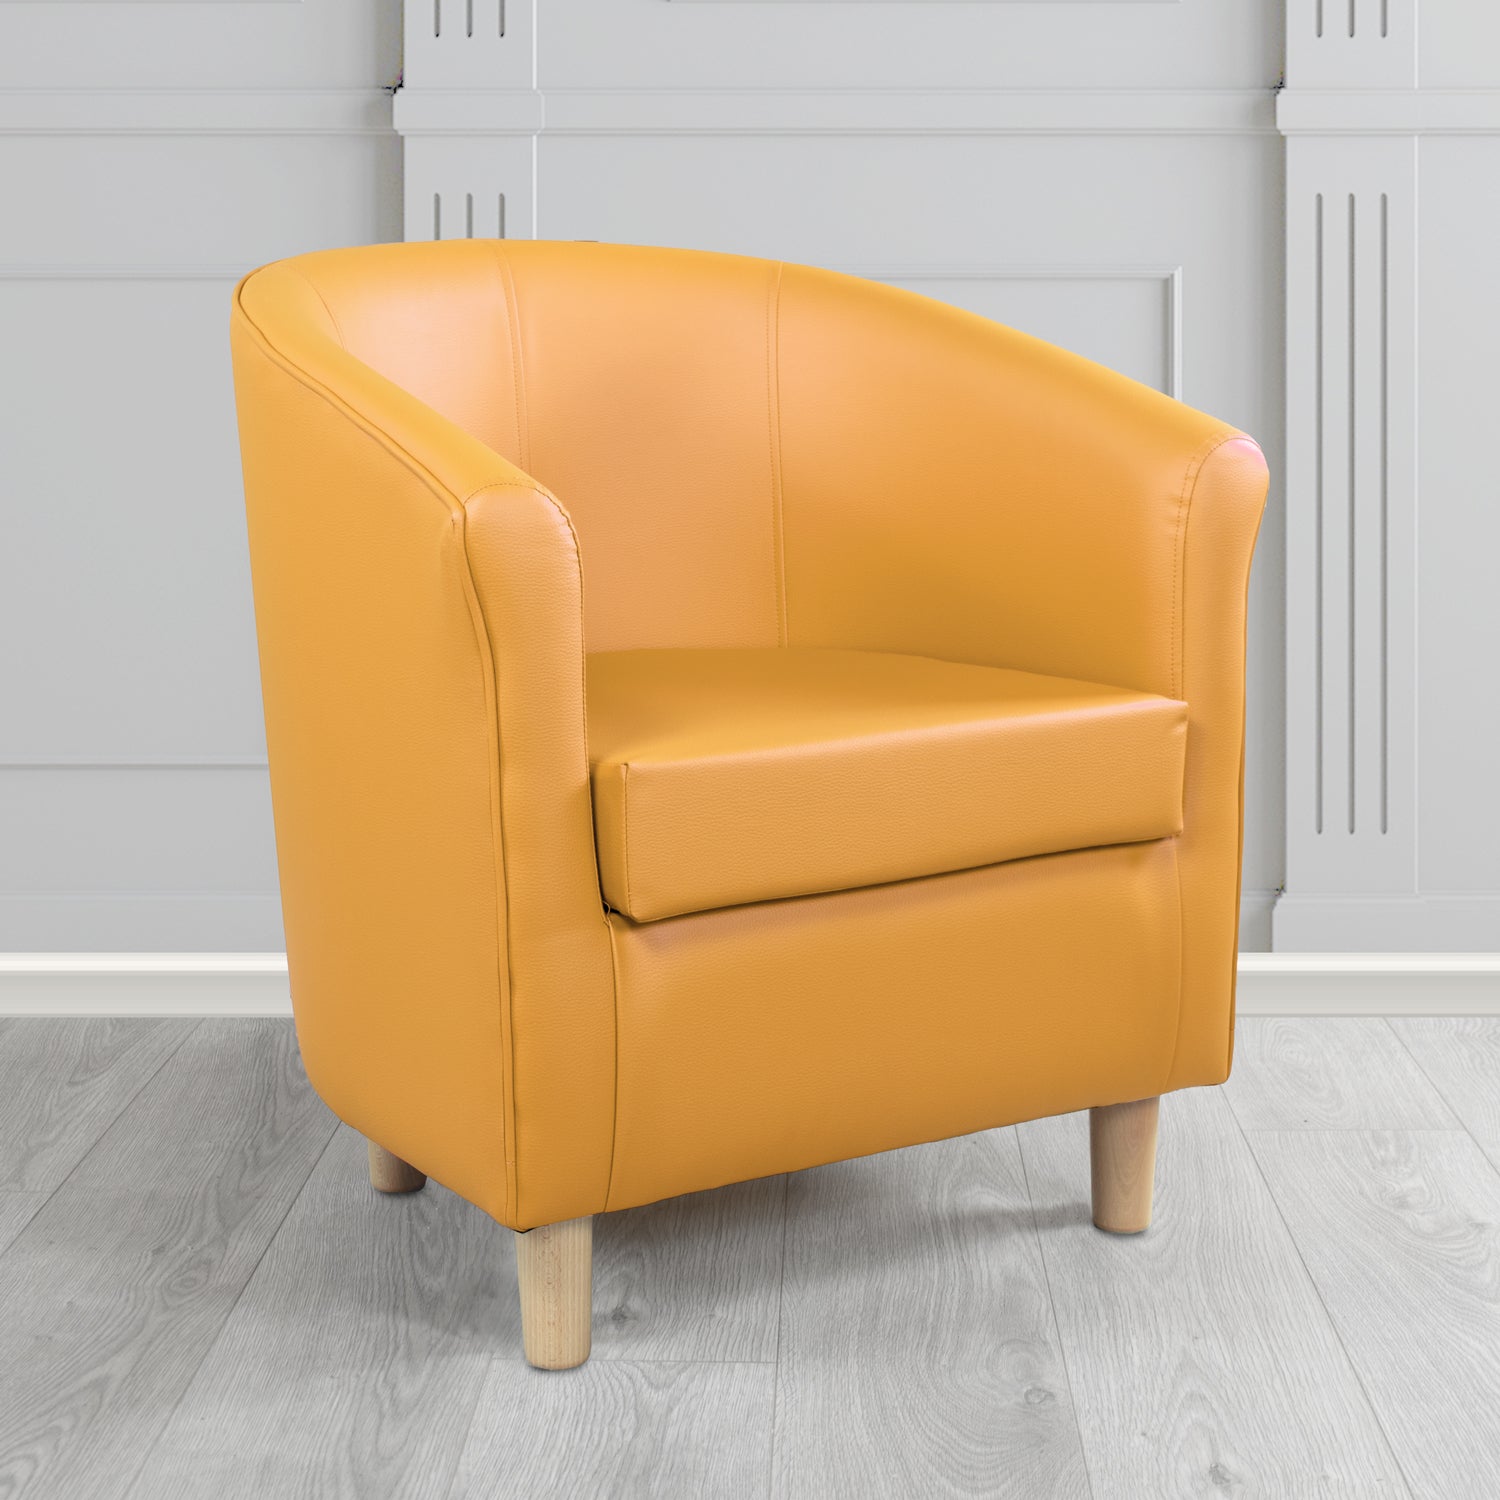 Tuscany Just Colour Sunblush Antimicrobial Crib 5 Contract Faux Leather Tub Chair - The Tub Chair Shop